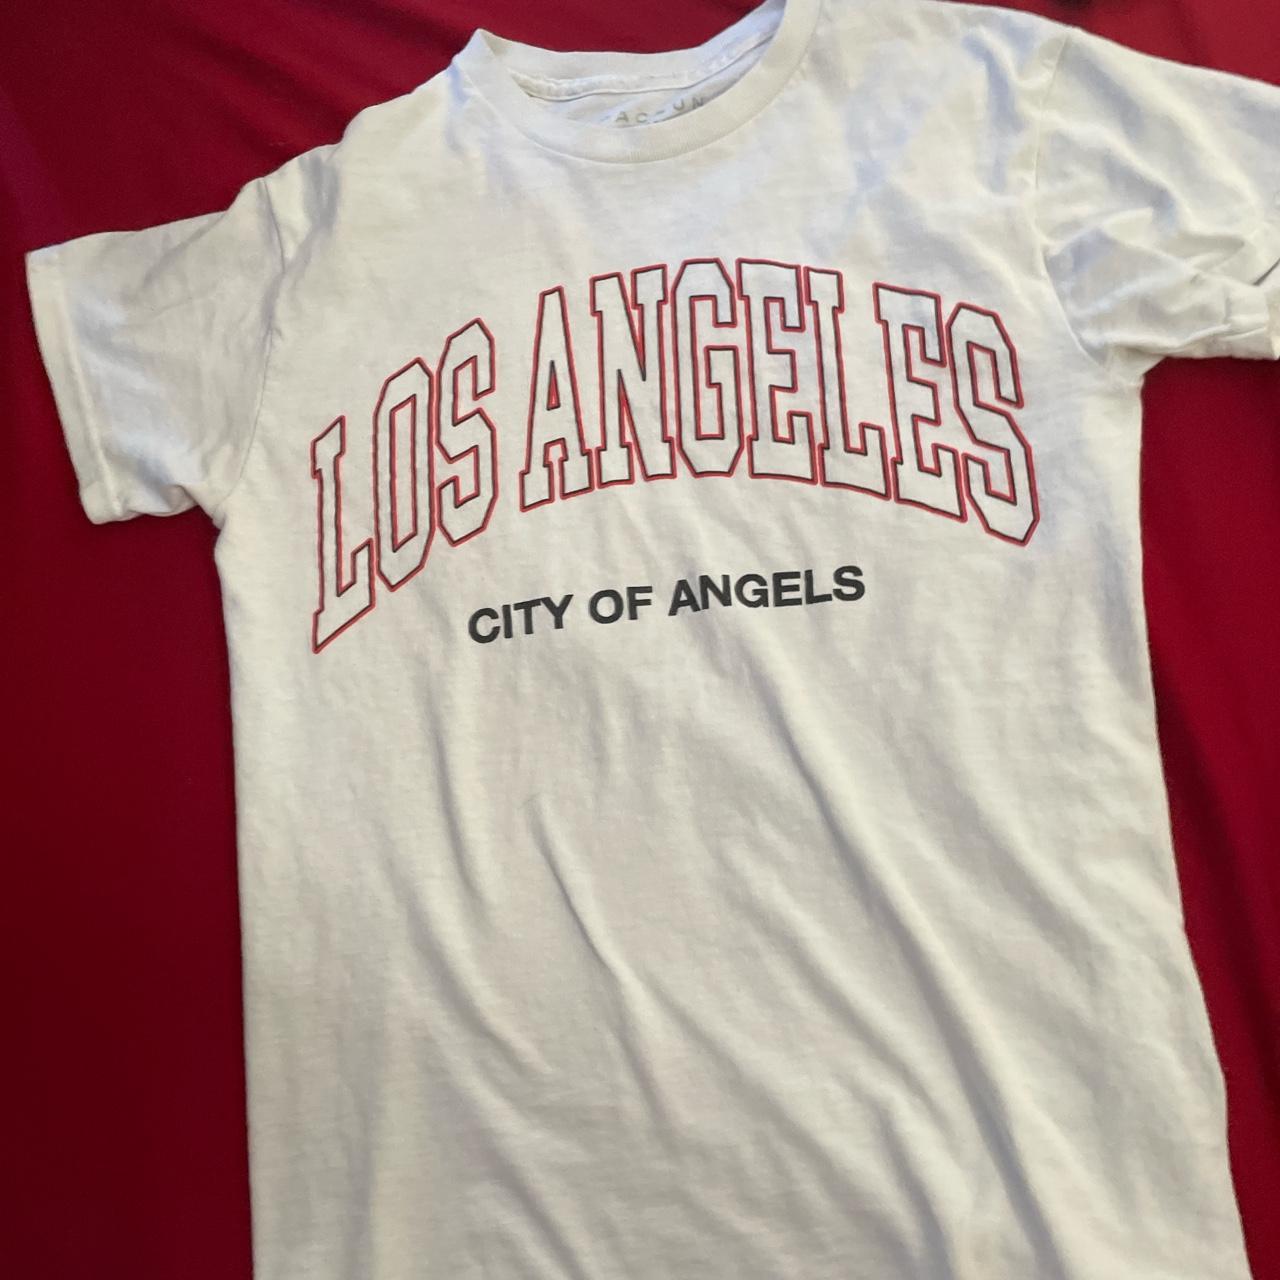 Pacsun Men's City of Angels T-Shirt in Black - Size Small